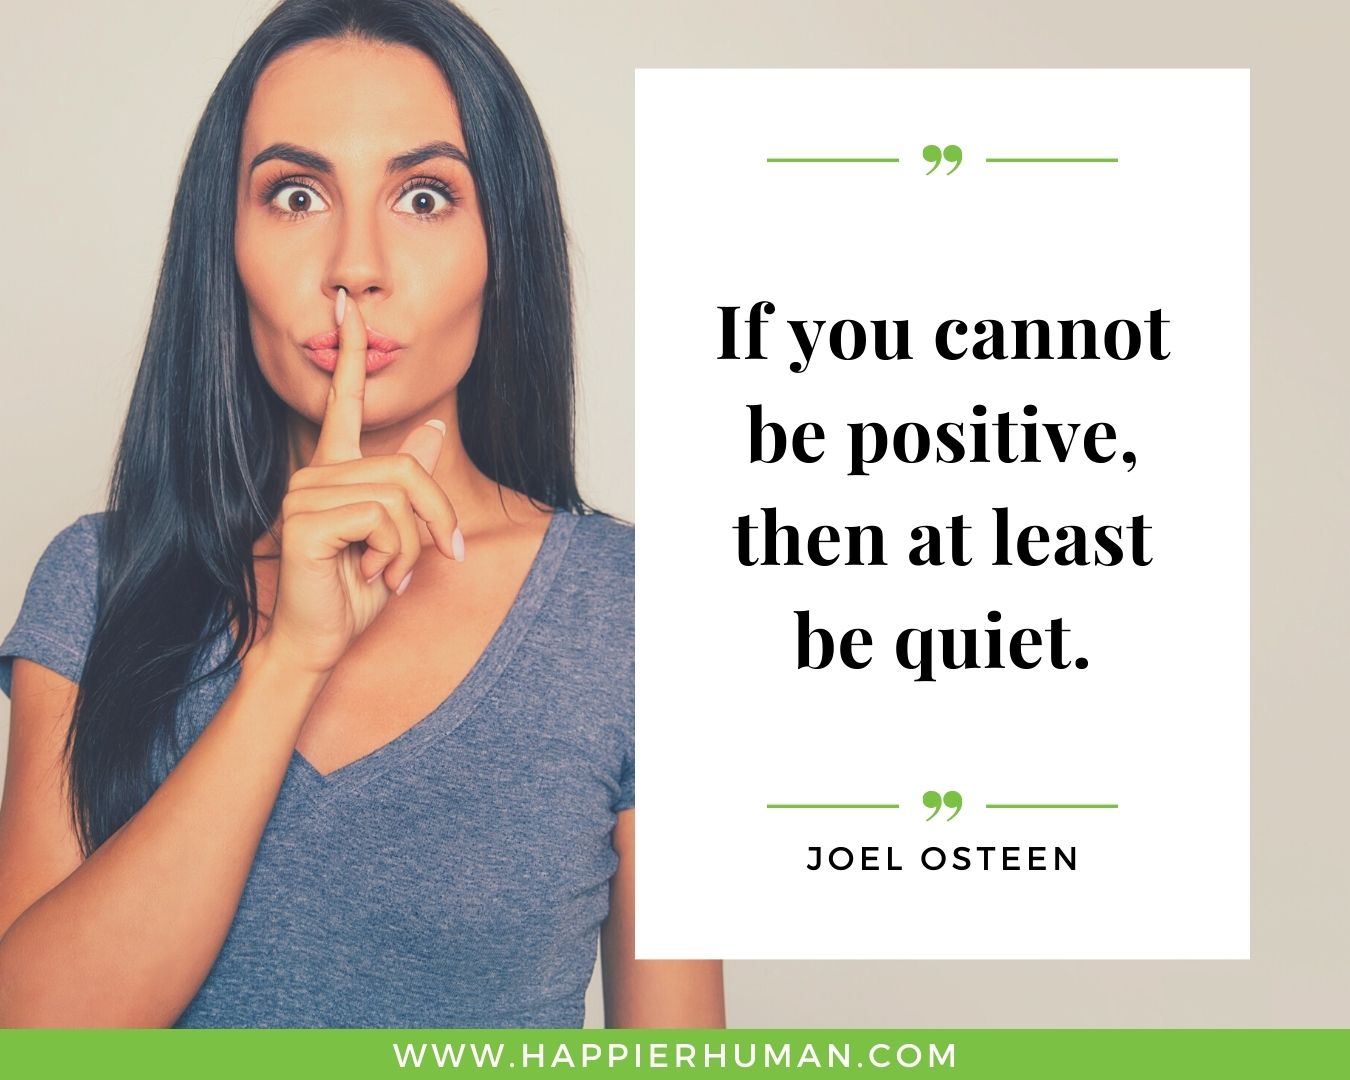 Haters Quotes - “If you cannot be positive, then at least be quiet.” - Joel Osteen